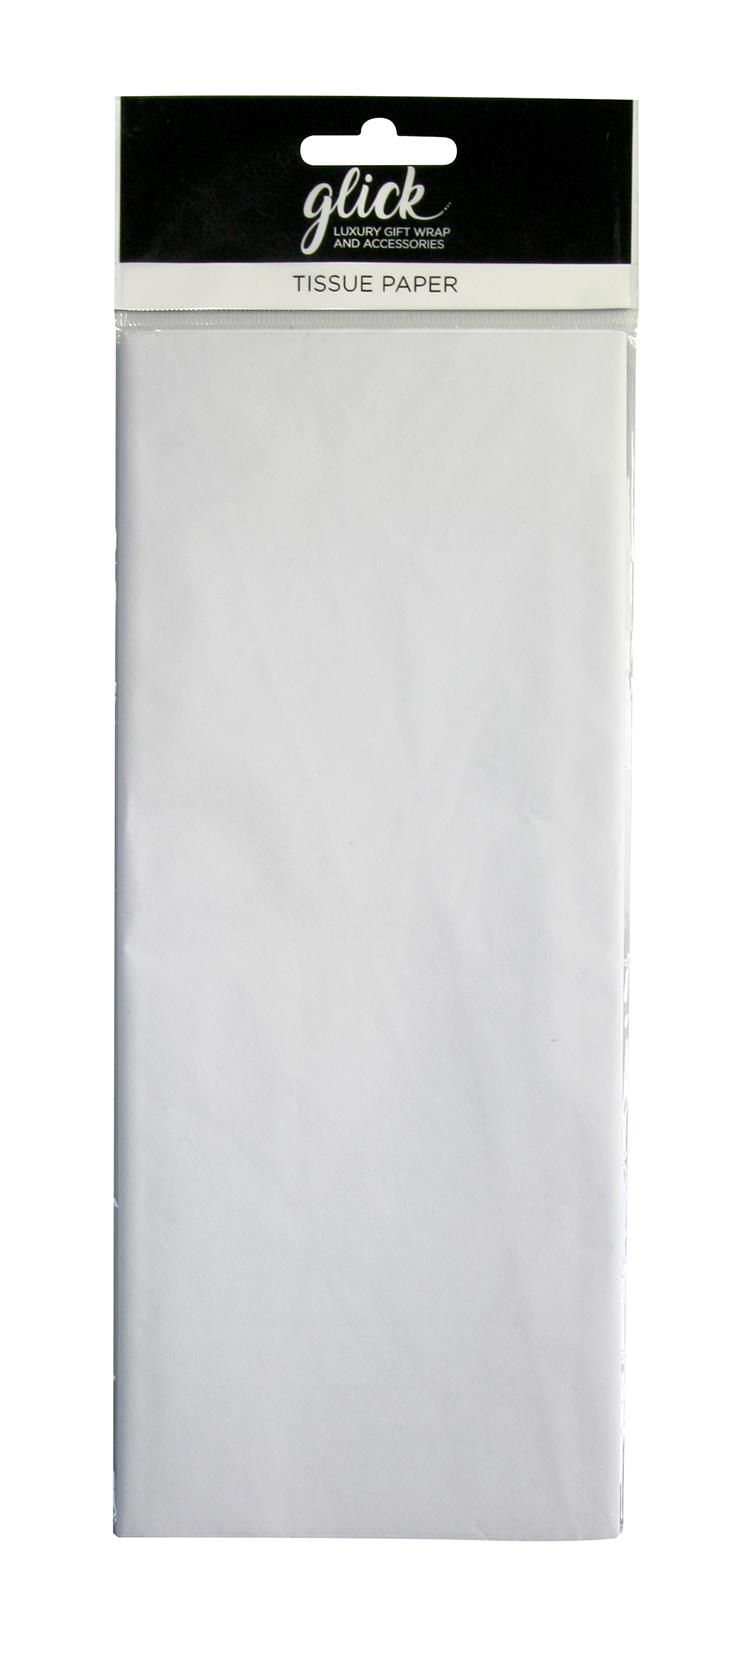 White Luxury Tissue Paper - Pack Of 4 - Luxury TISSUE Paper - GIFT Wrapping